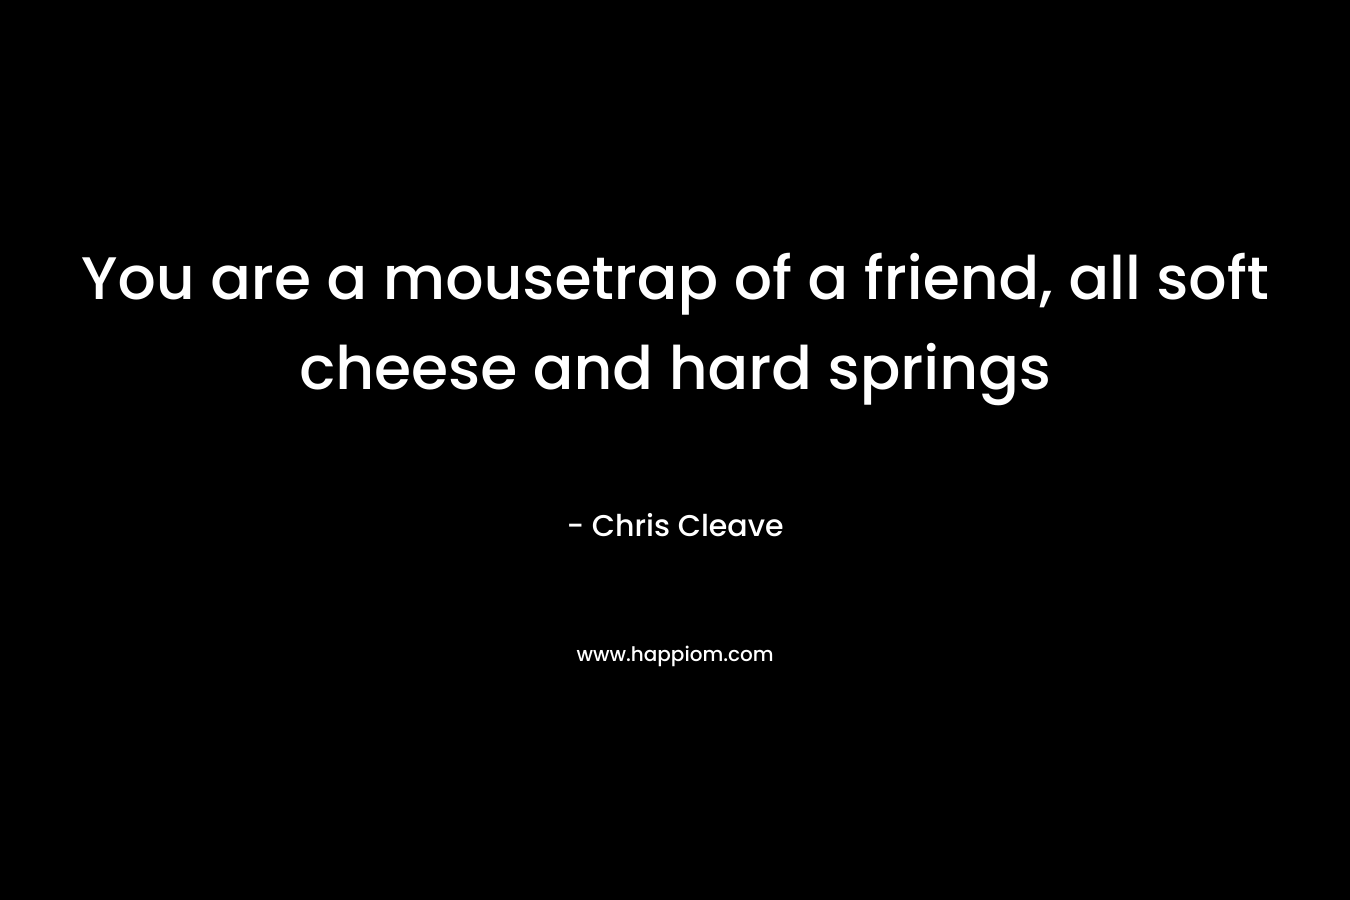 You are a mousetrap of a friend, all soft cheese and hard springs – Chris Cleave